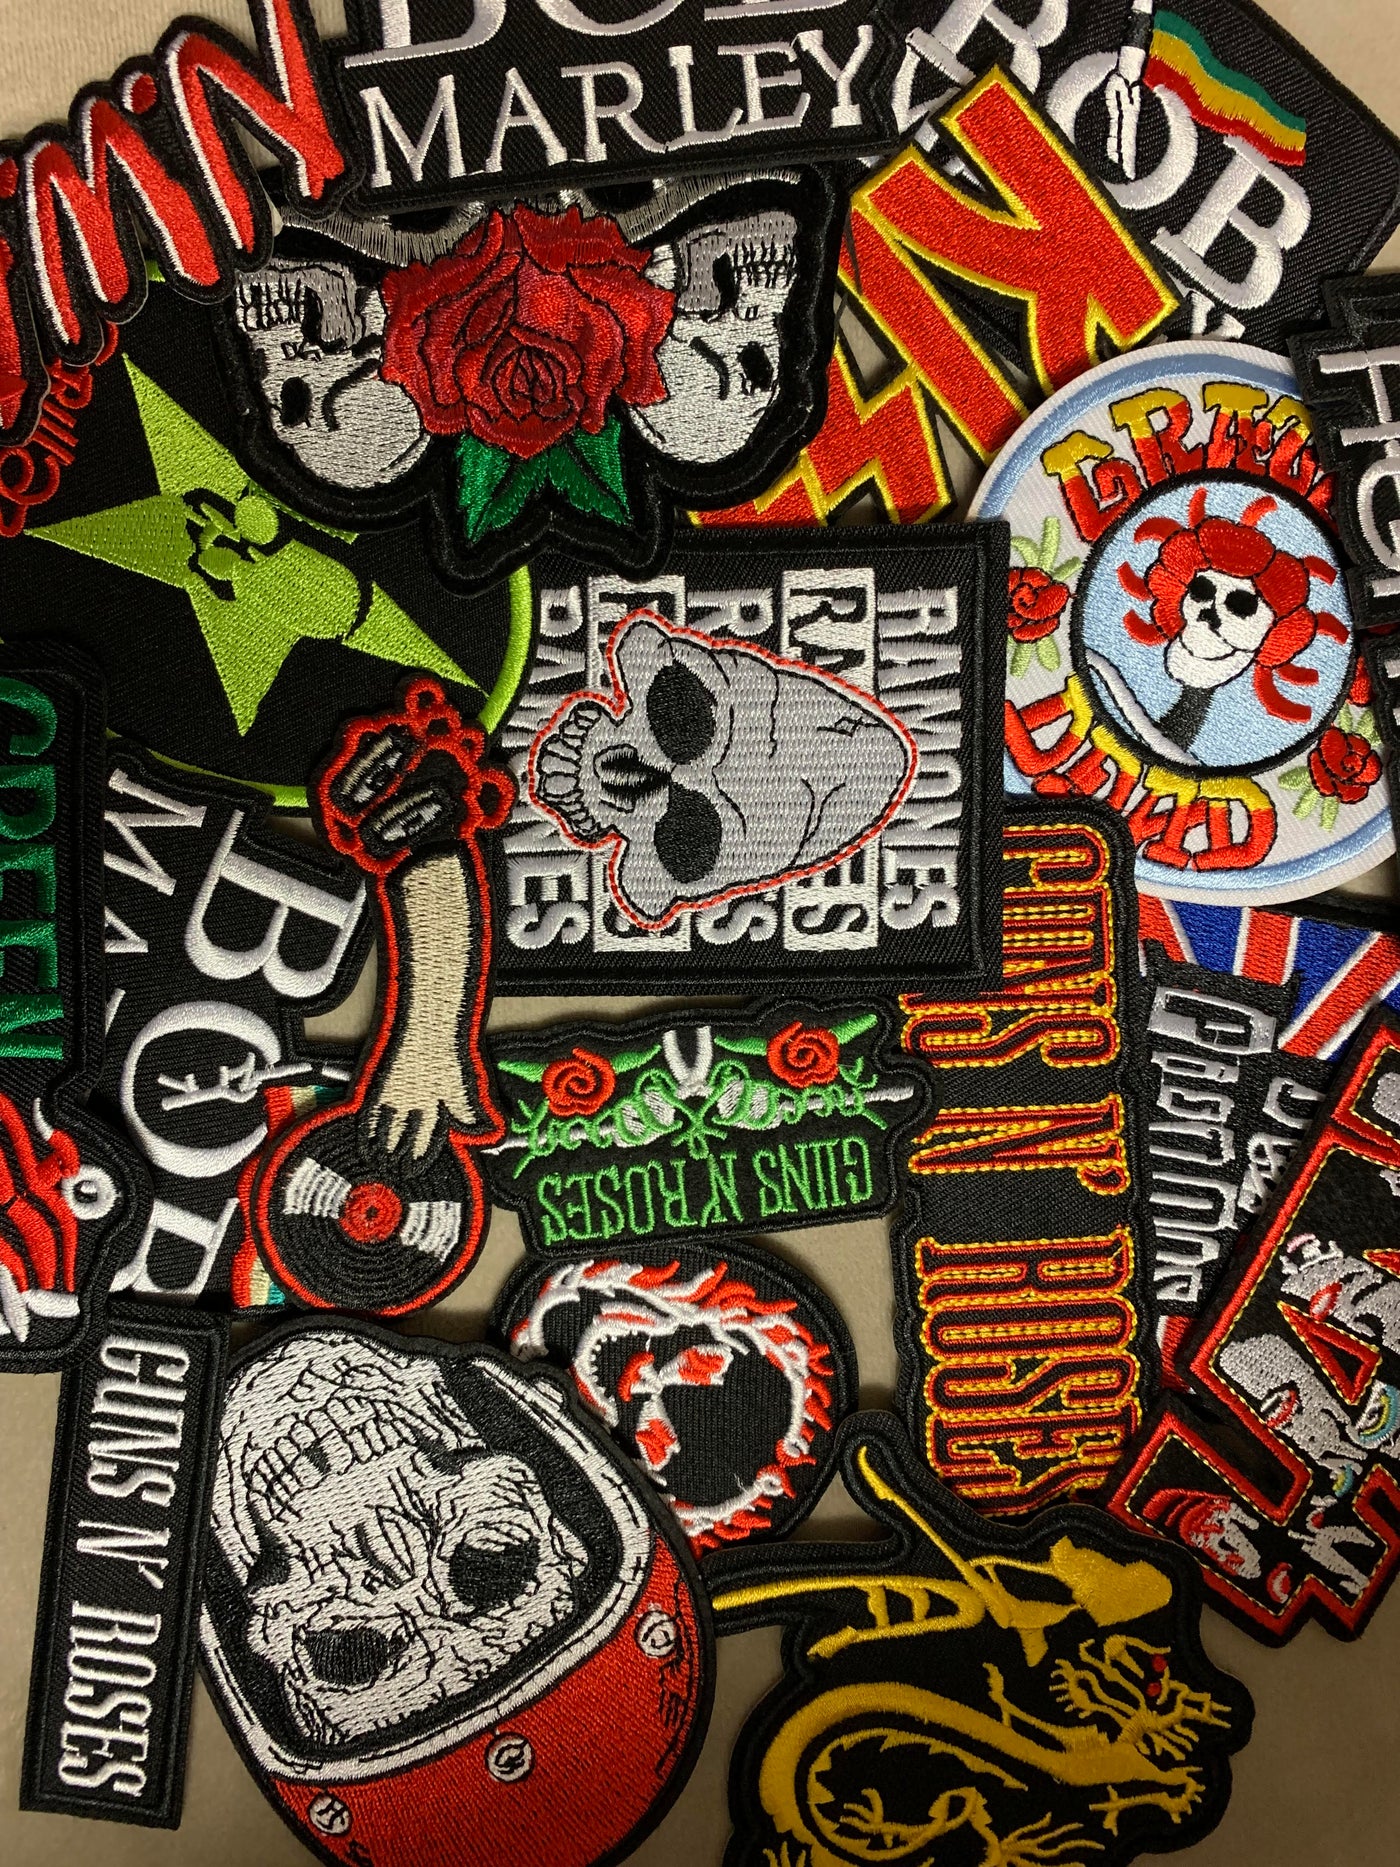 Patches - Various bands, various sizes $6.99 ea